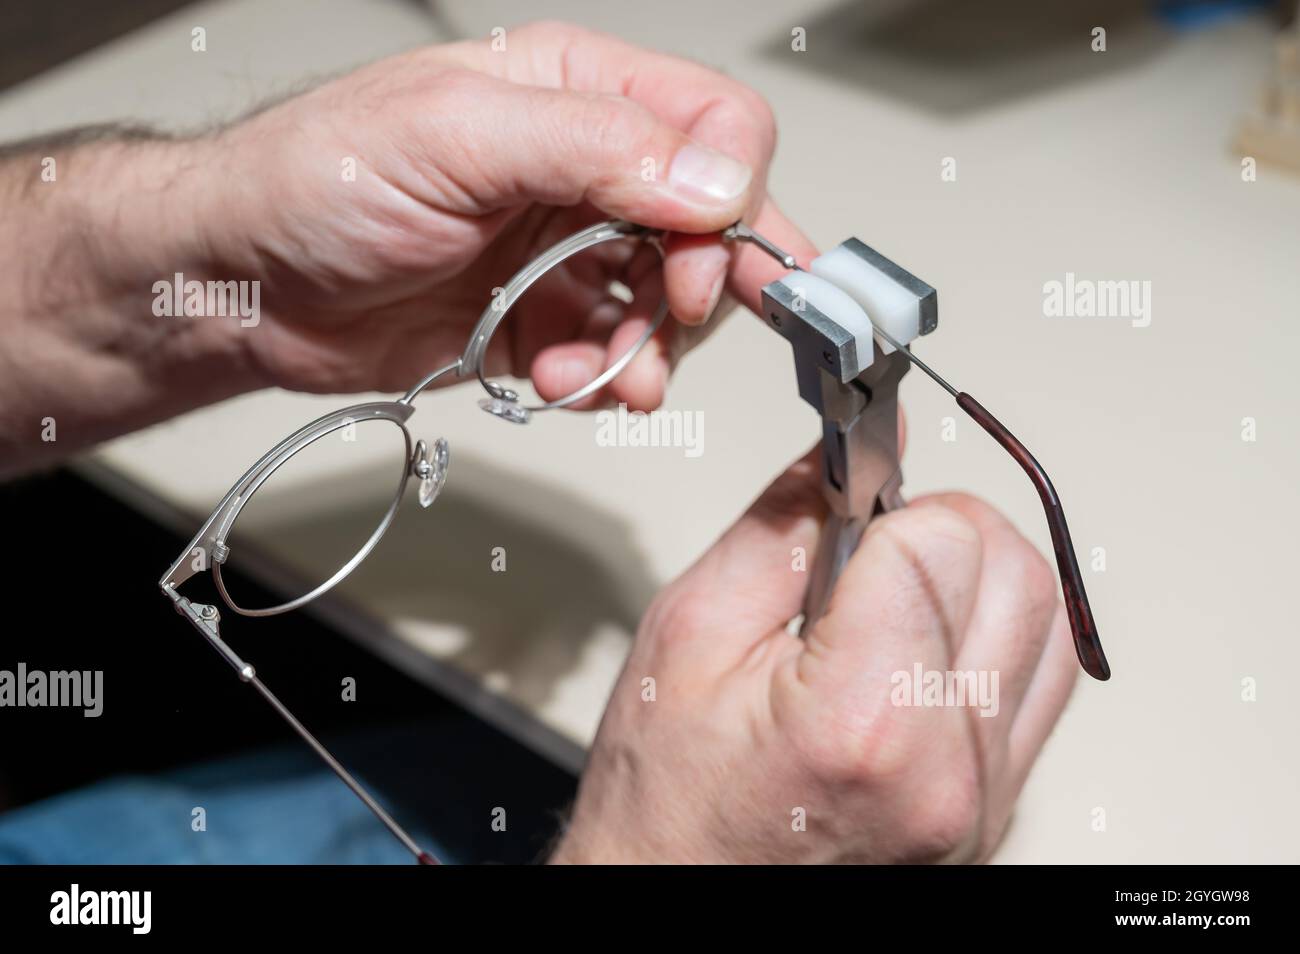 The man bends the temples of his glasses. The master repairs the frame with tongs. Stock Photo